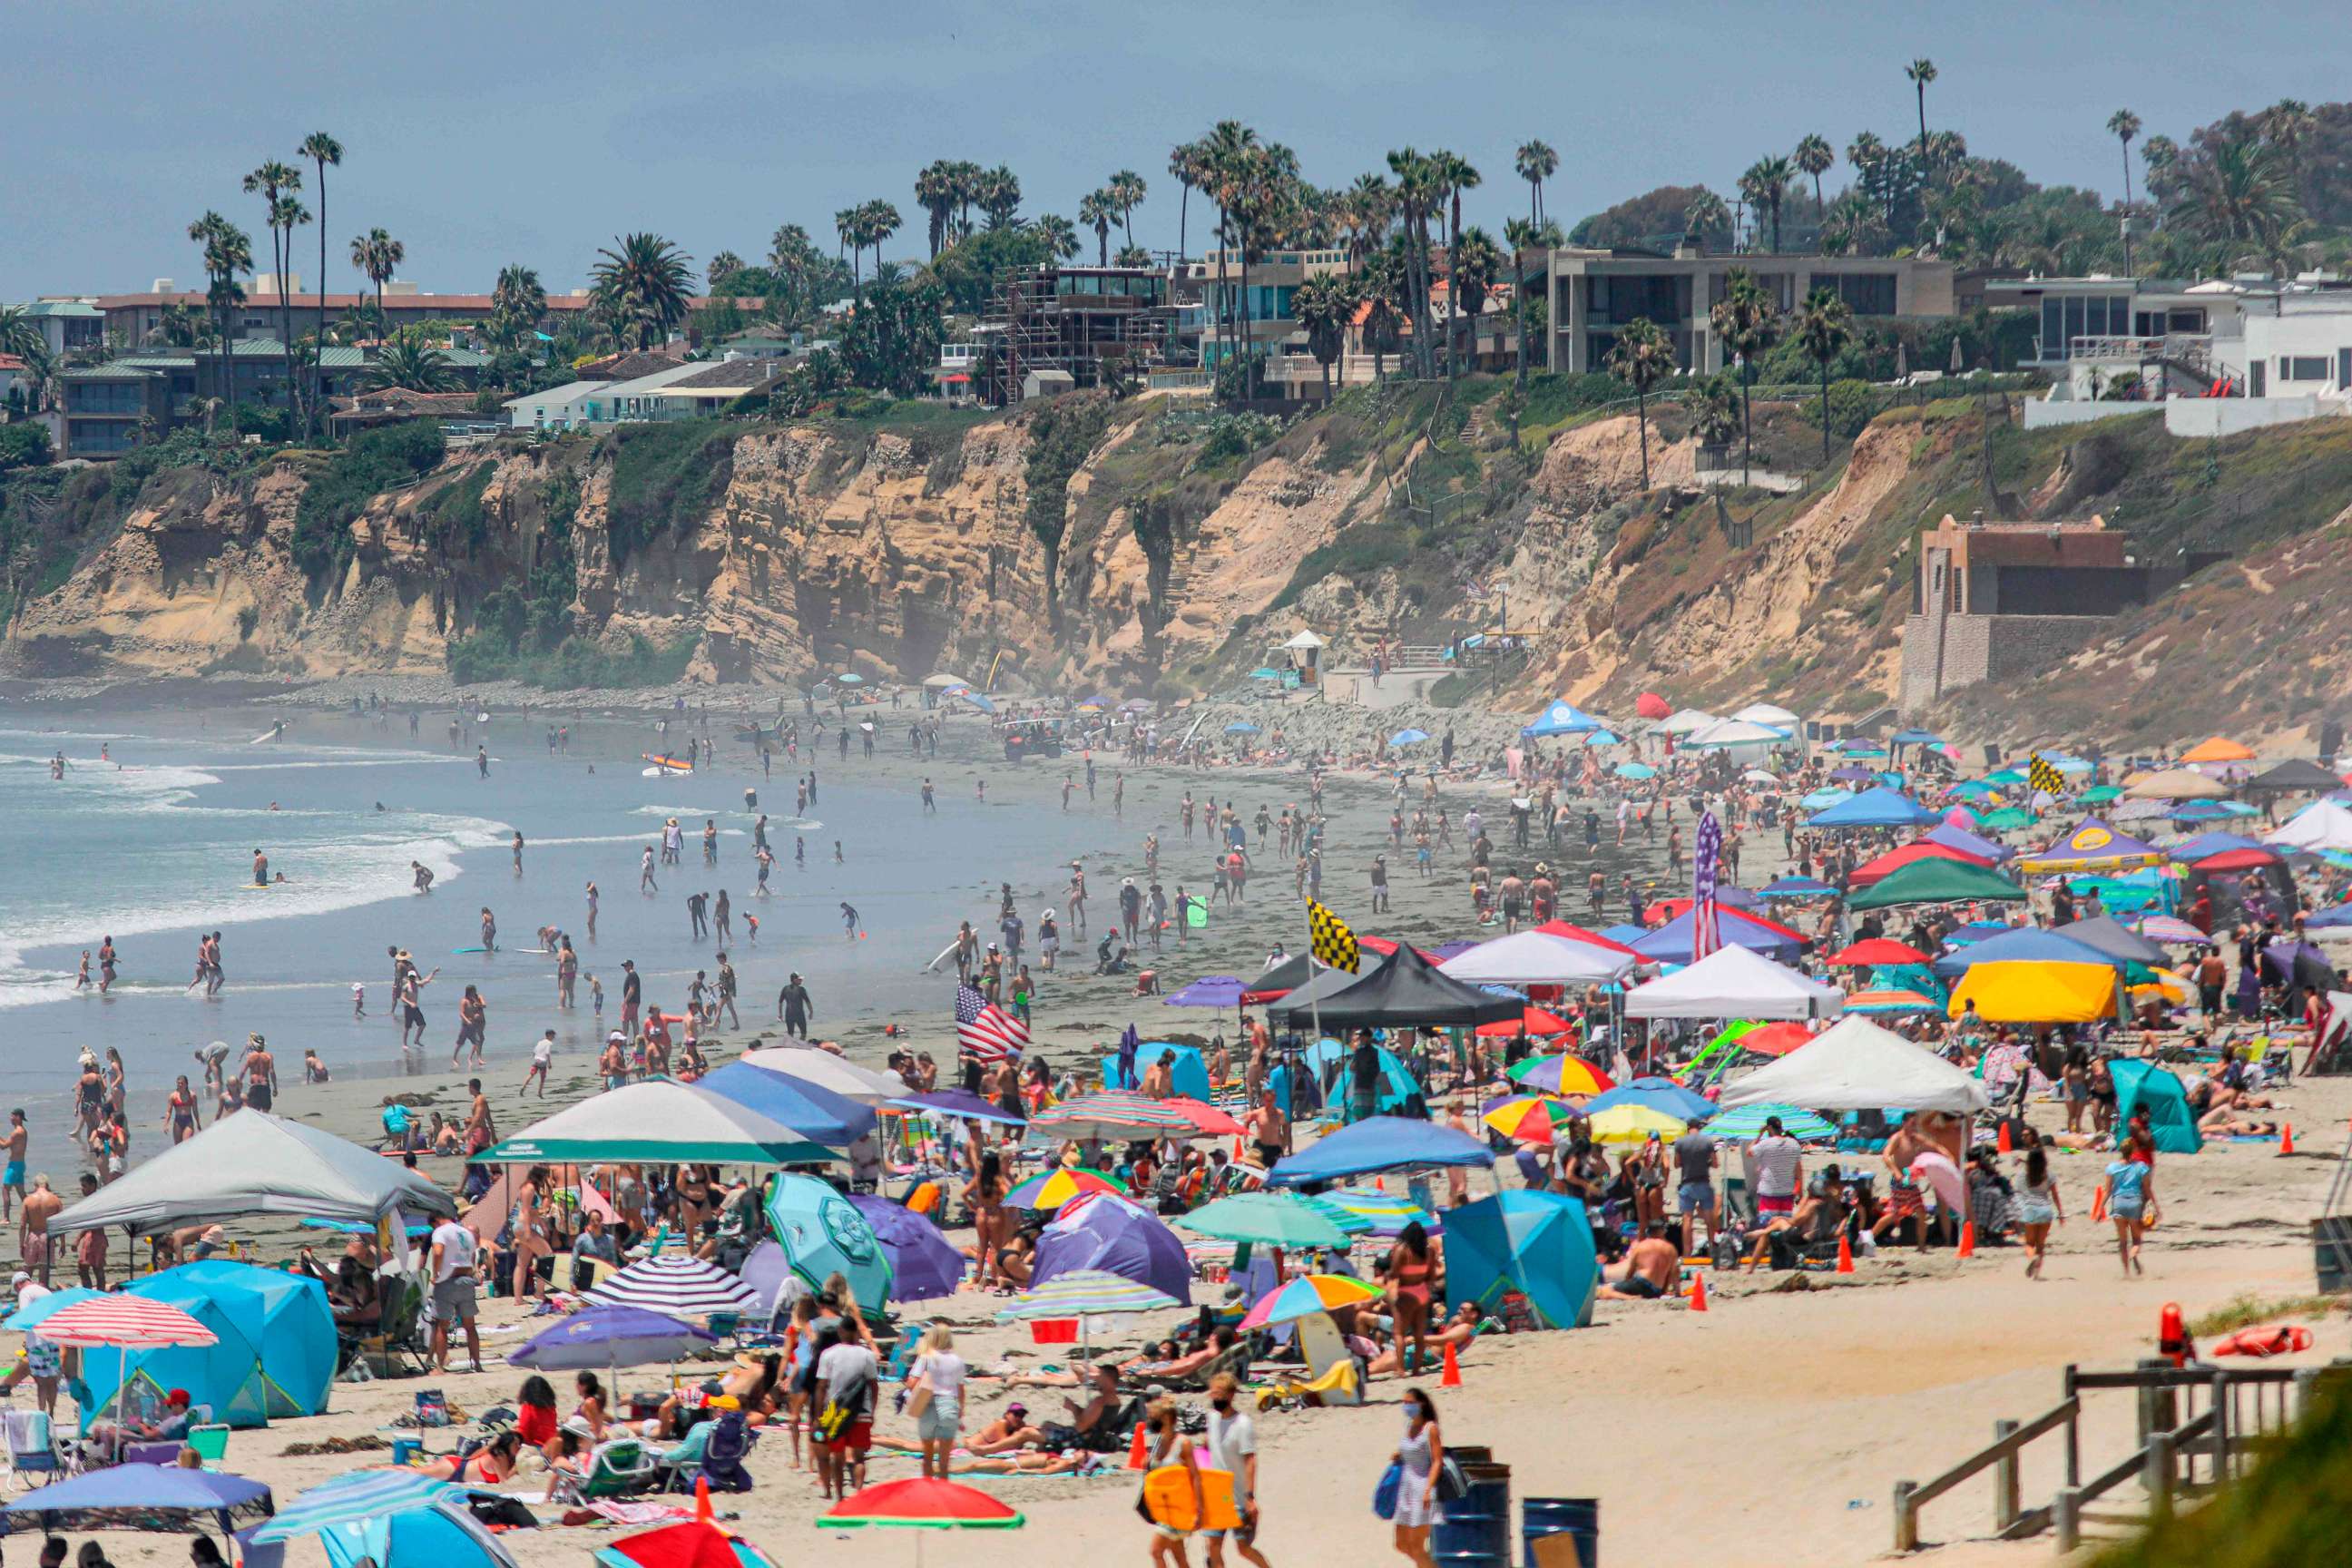 PHOTO: Beachgoers are seen along the shore in the Pacific Beach area of San Diego, California, on July 4, 2020.